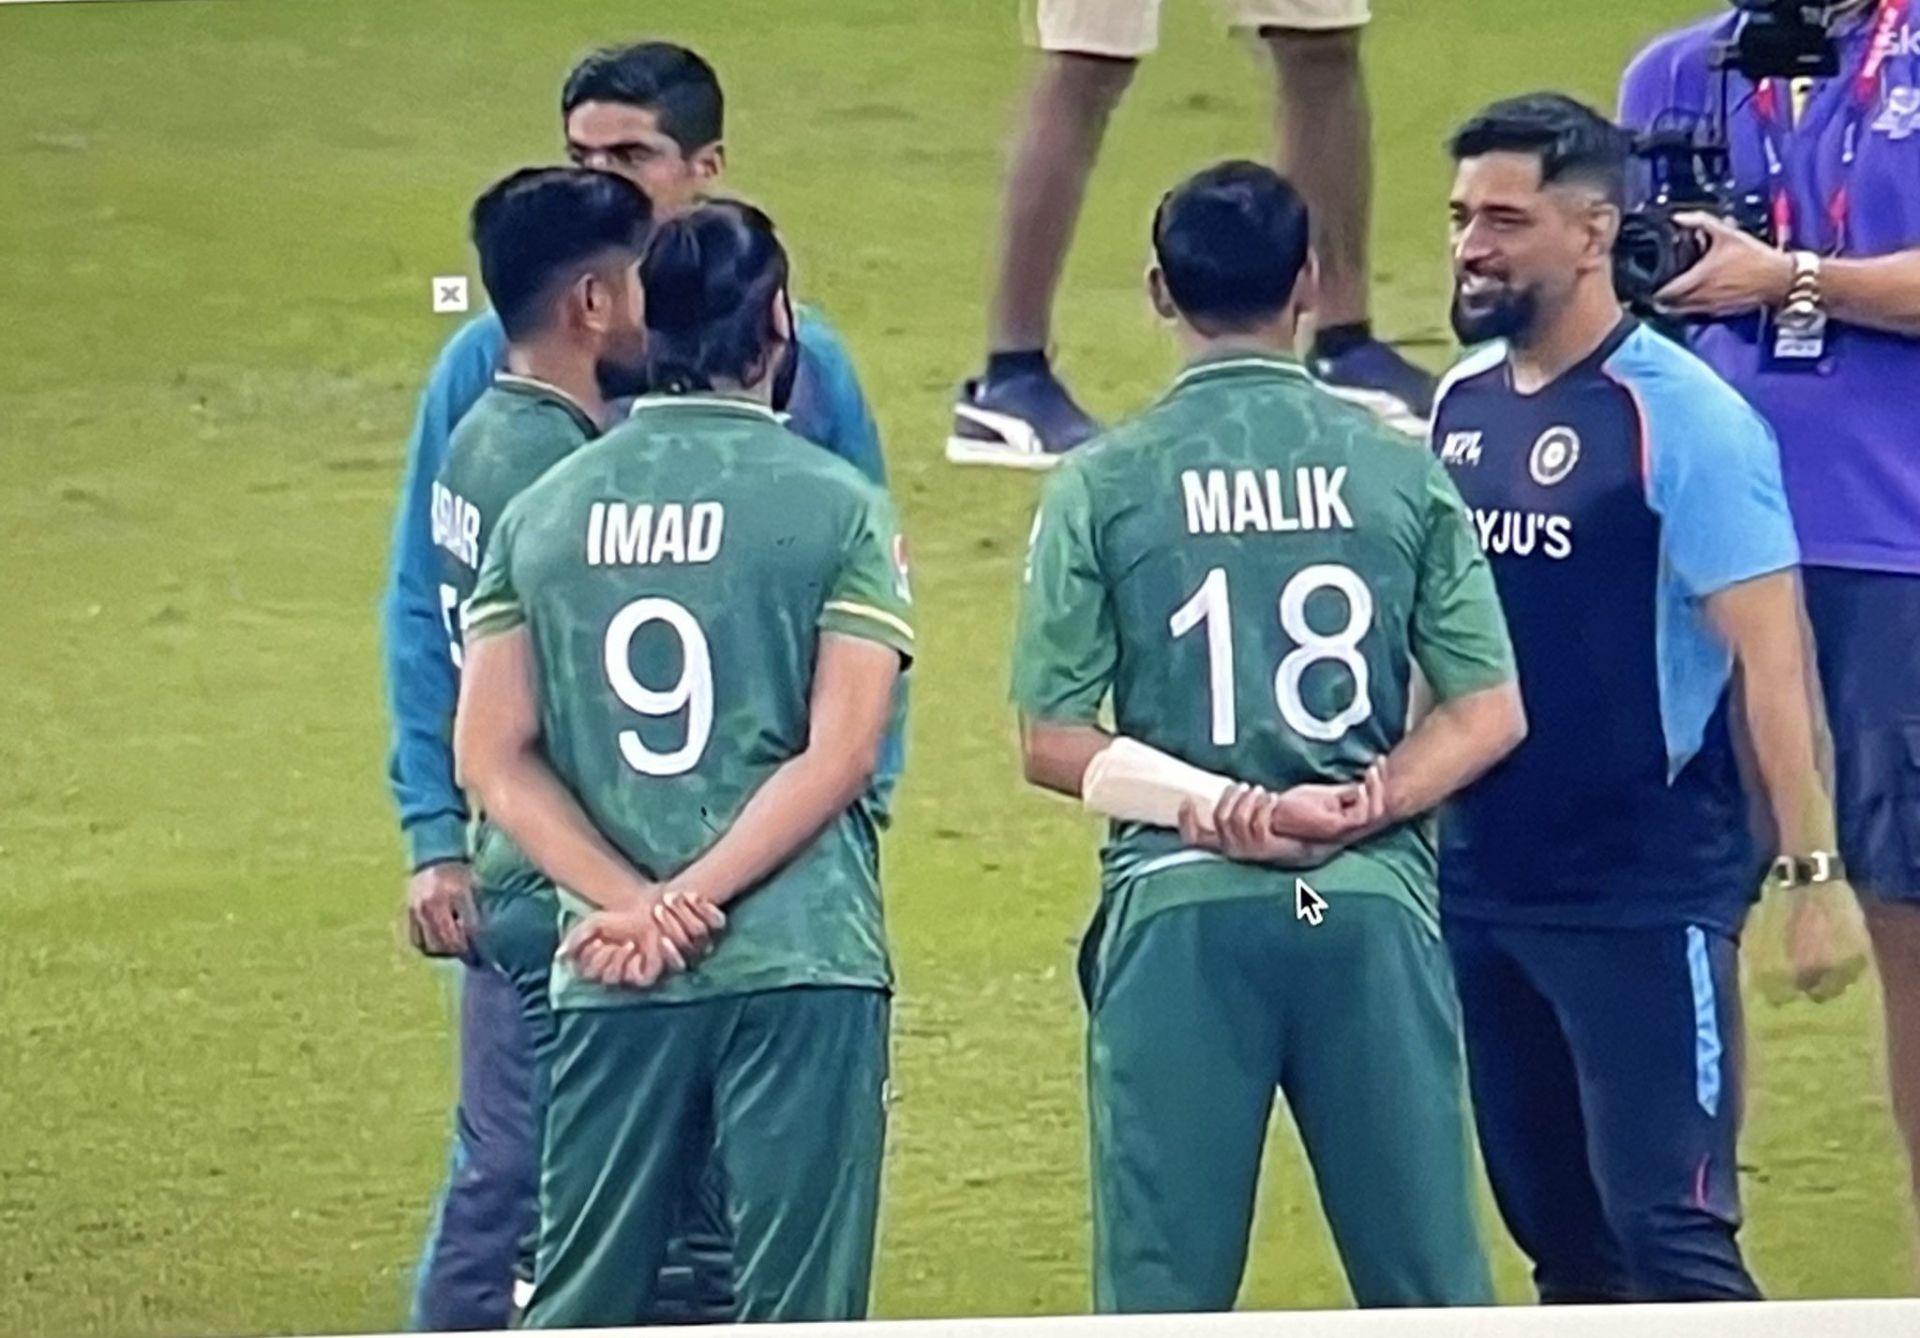 MS Dhoni sharing his wisdom with Pakistan cricketers [Image- Twitter]